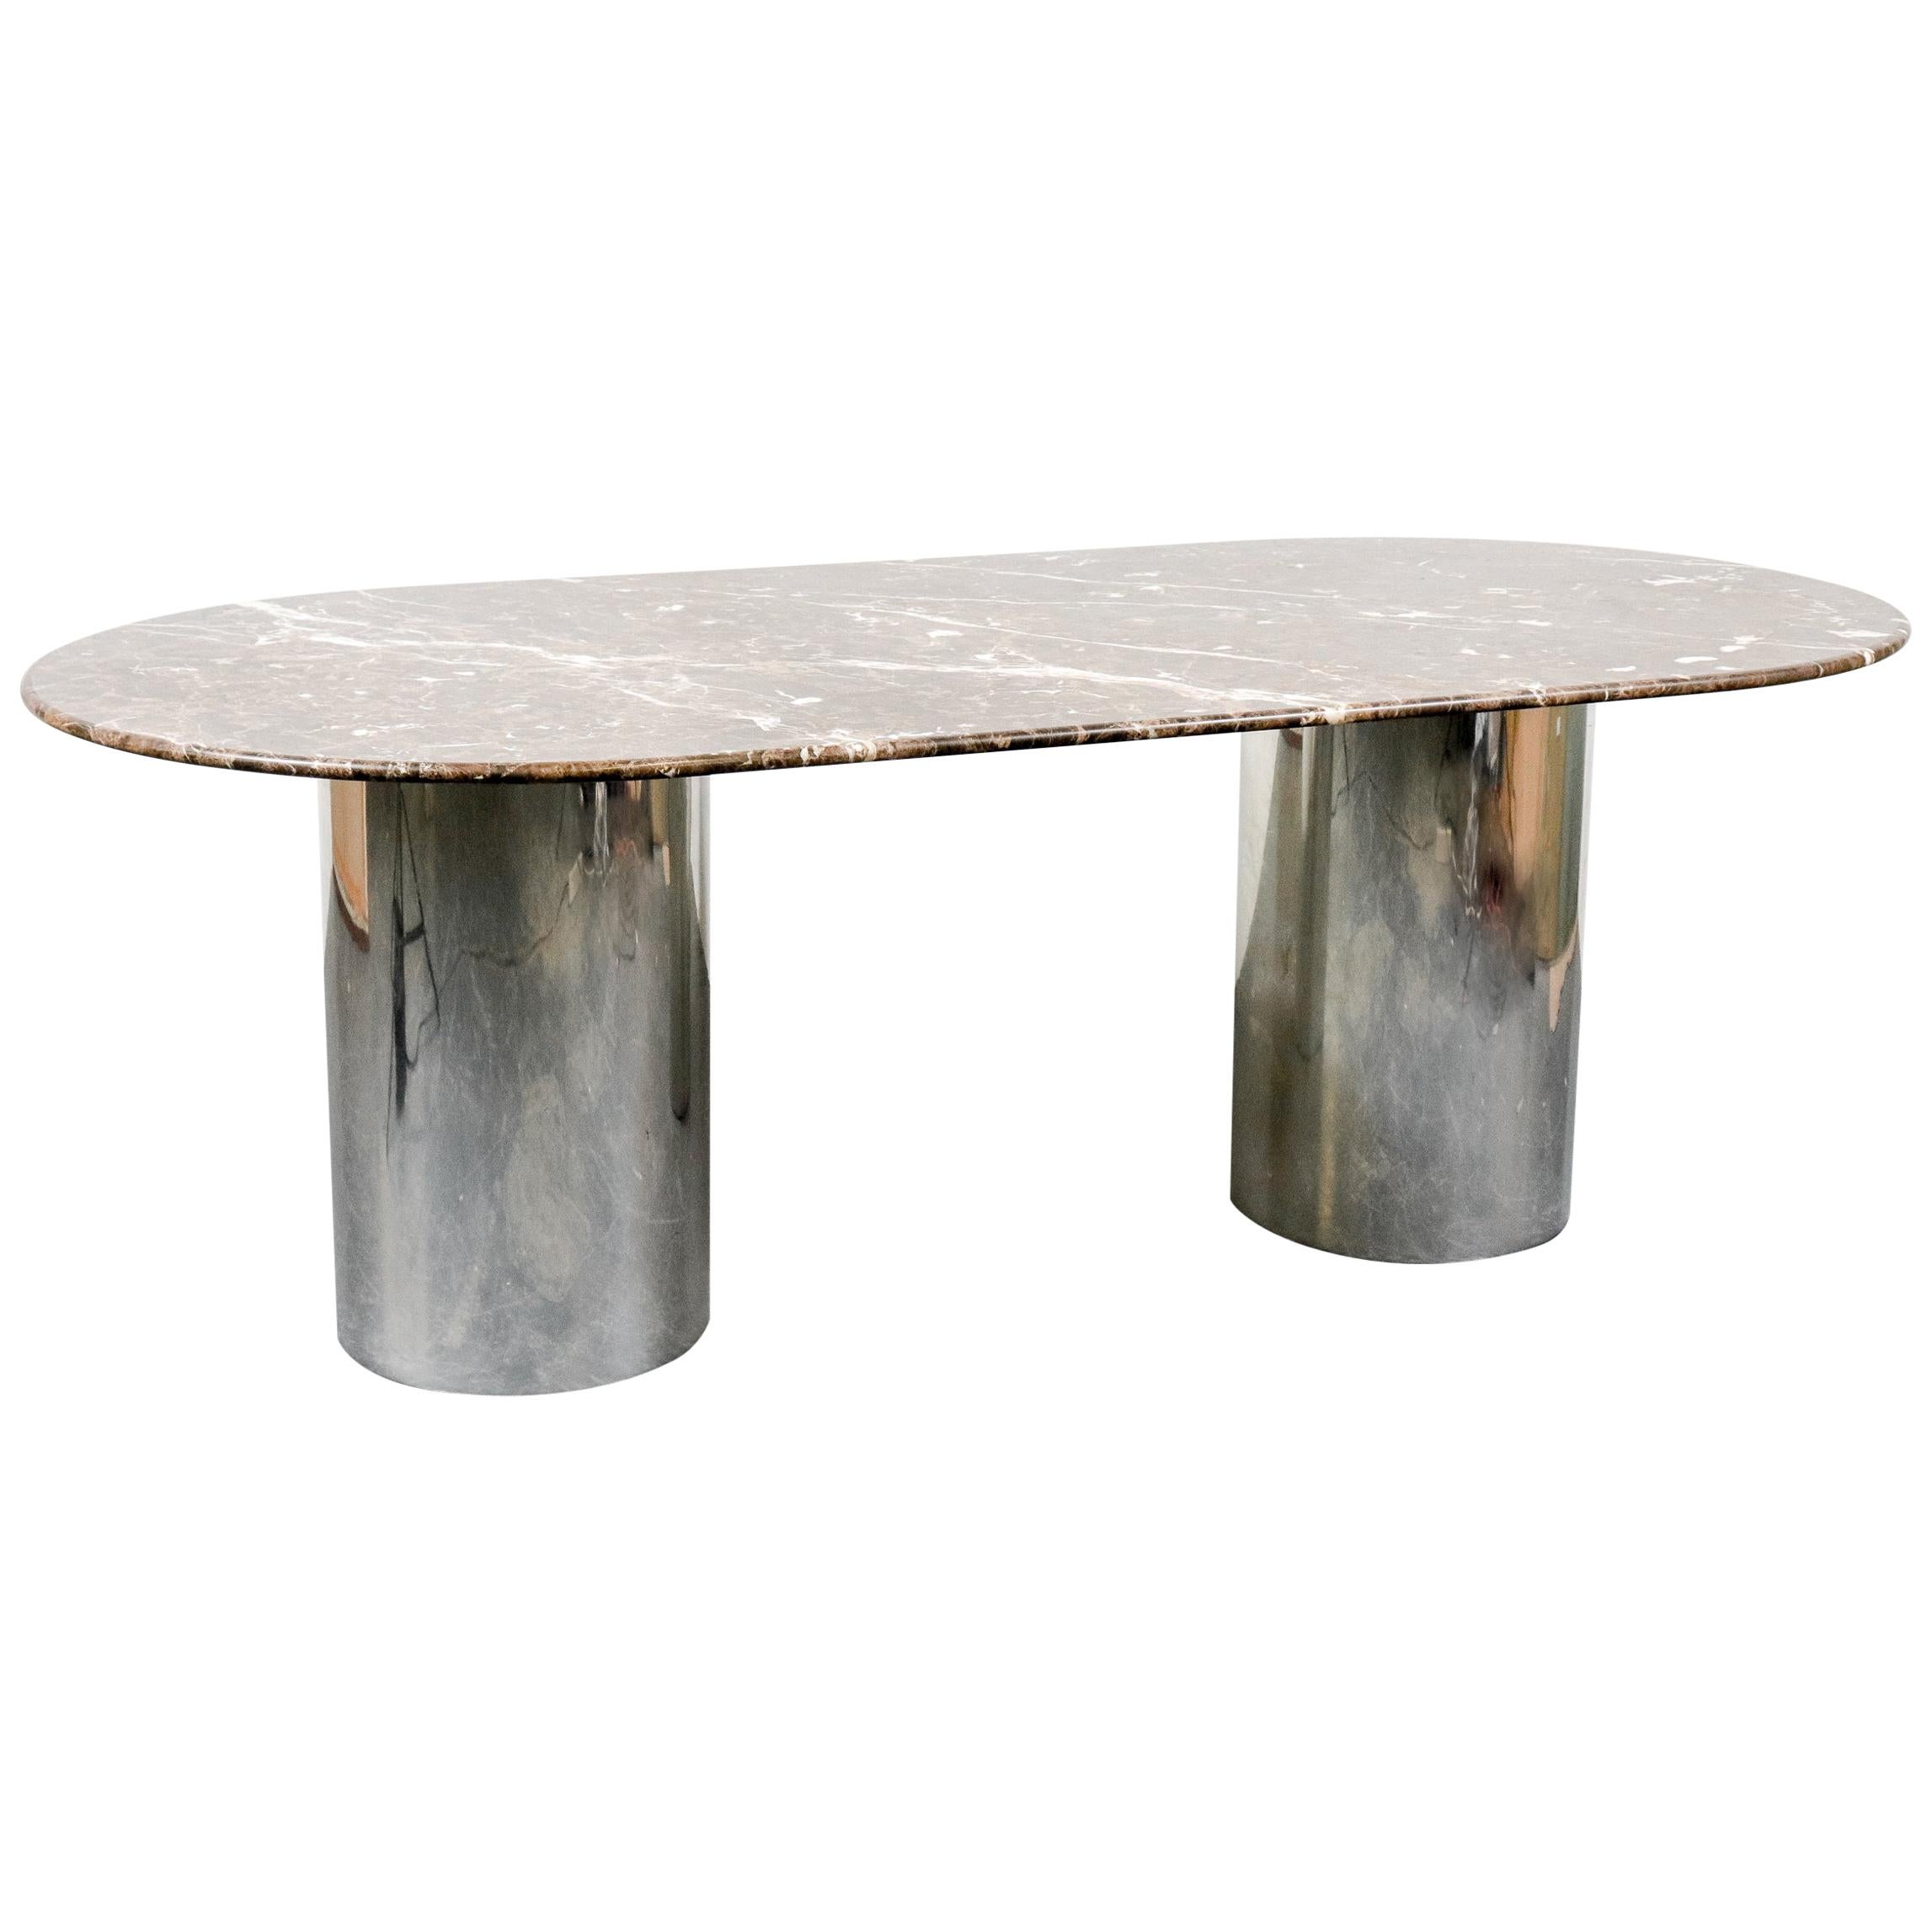 Italian Postmodern Chrome Dining Table with Emperador Marble Top